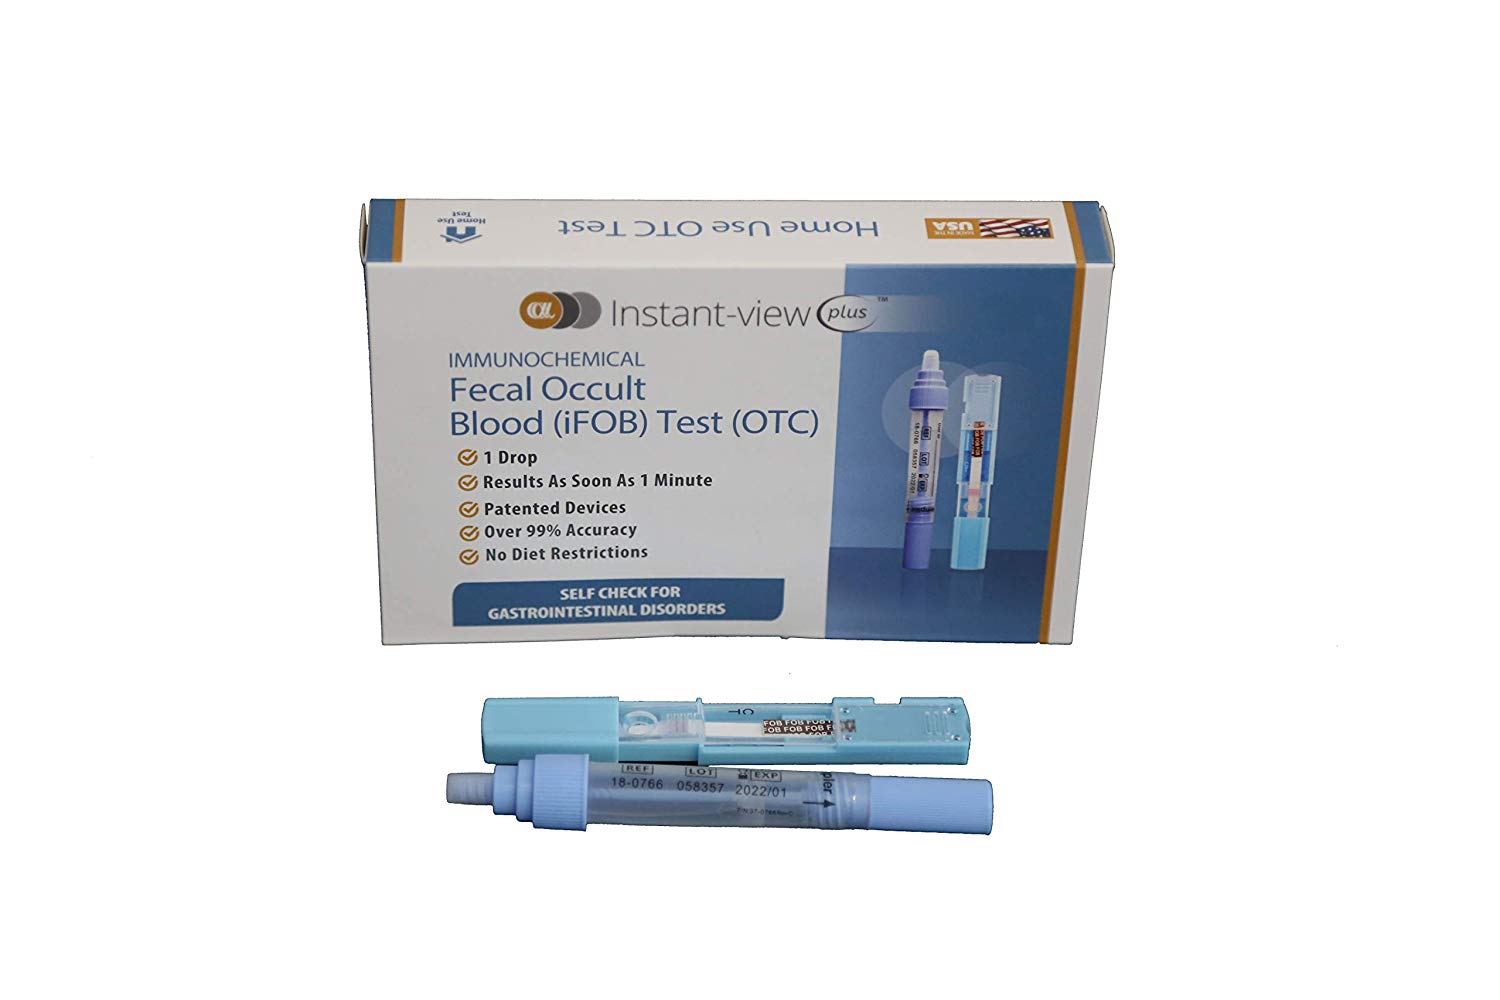 Instant-view® PLUS immunochemical Fecal Occult Blood (iFOB) Home Test - Rapid One Step Test